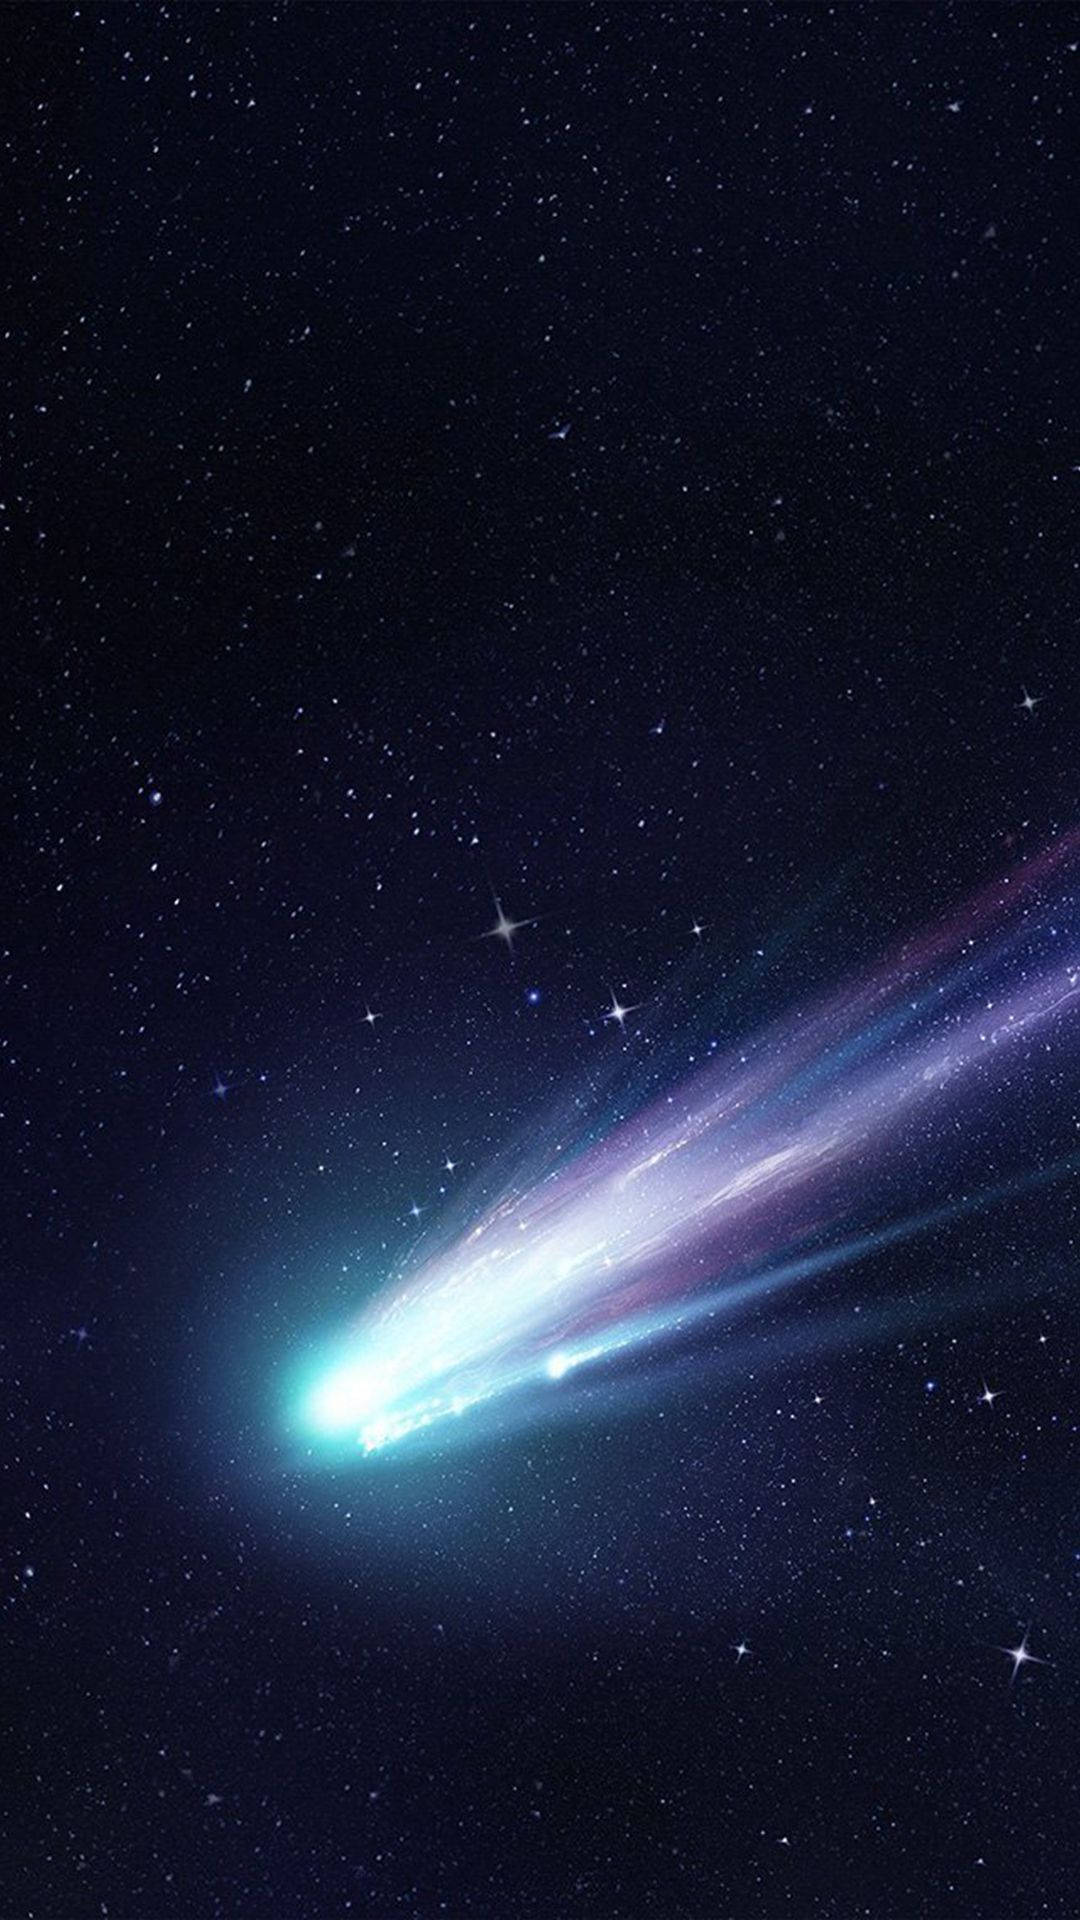 Shooting Star From Space Wallpaper